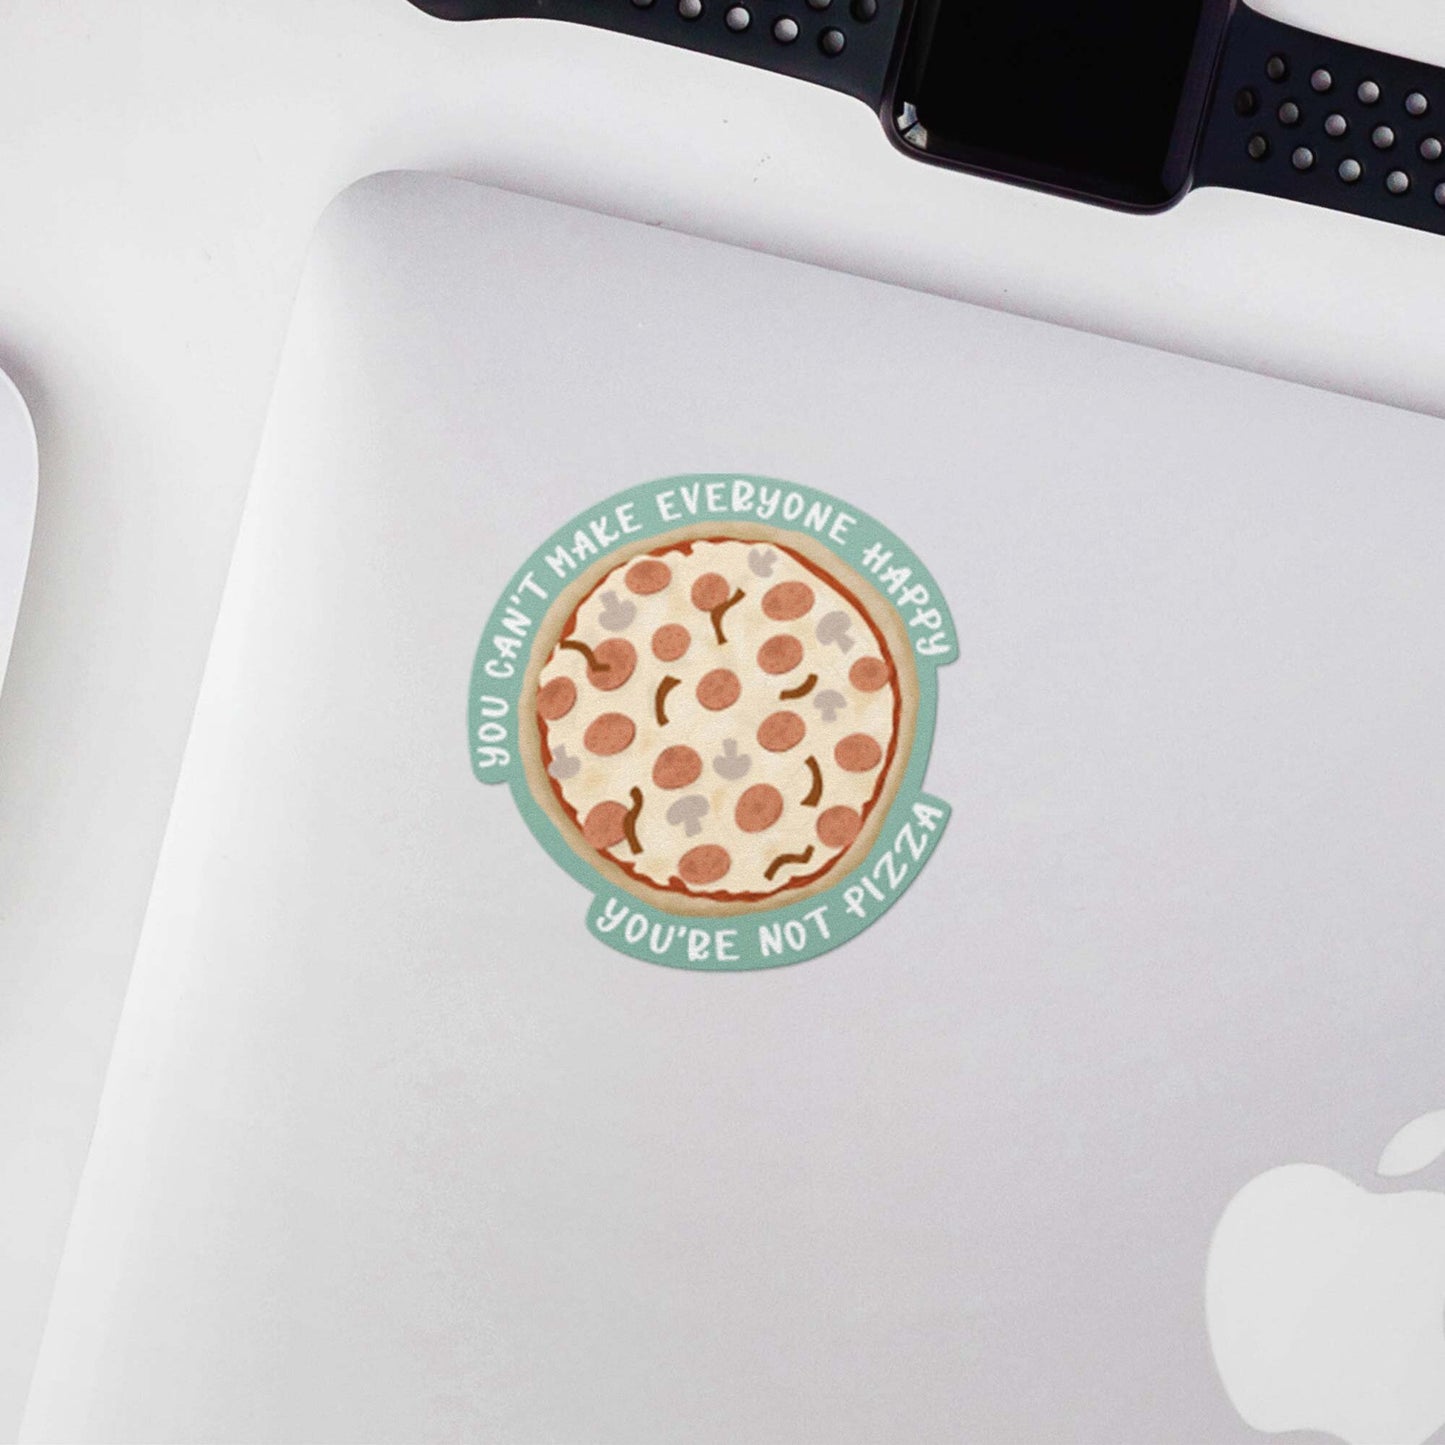 You Can't Make Everyone Happy... Pizza Vinyl Sticker